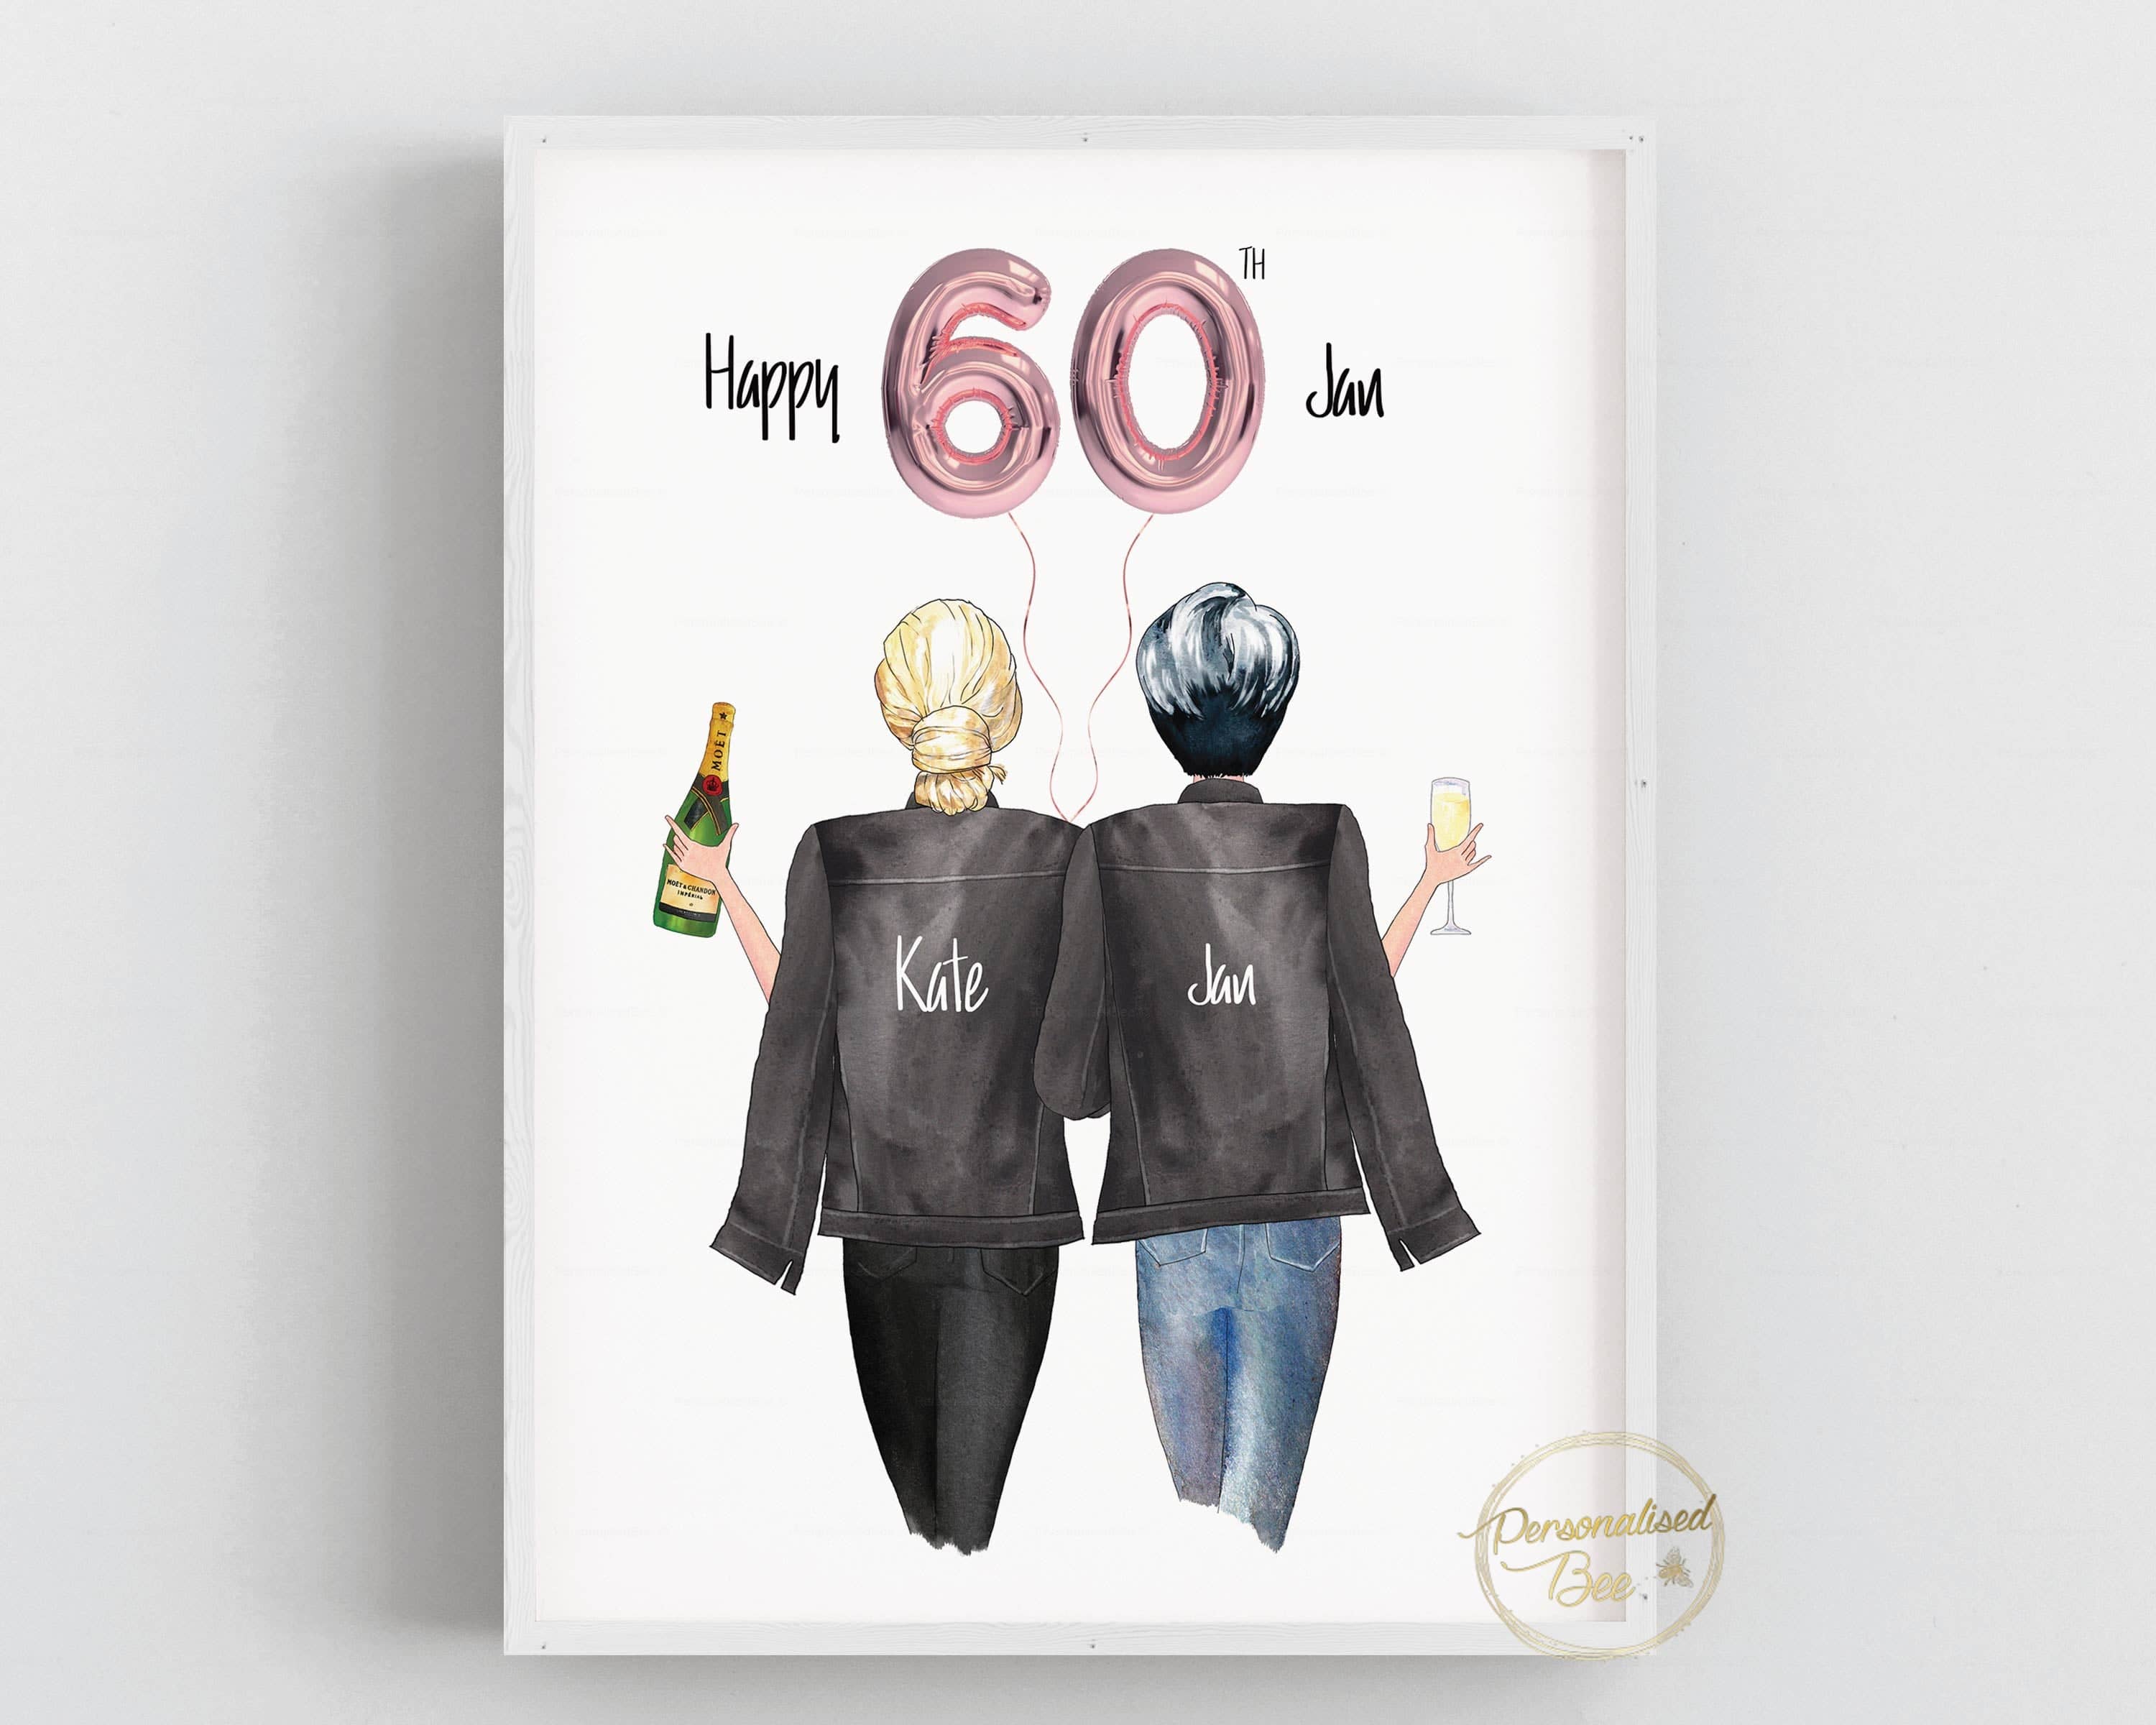 60th Birthday Gift for Her - Personalised Friendship Print with Birthday Balloons.